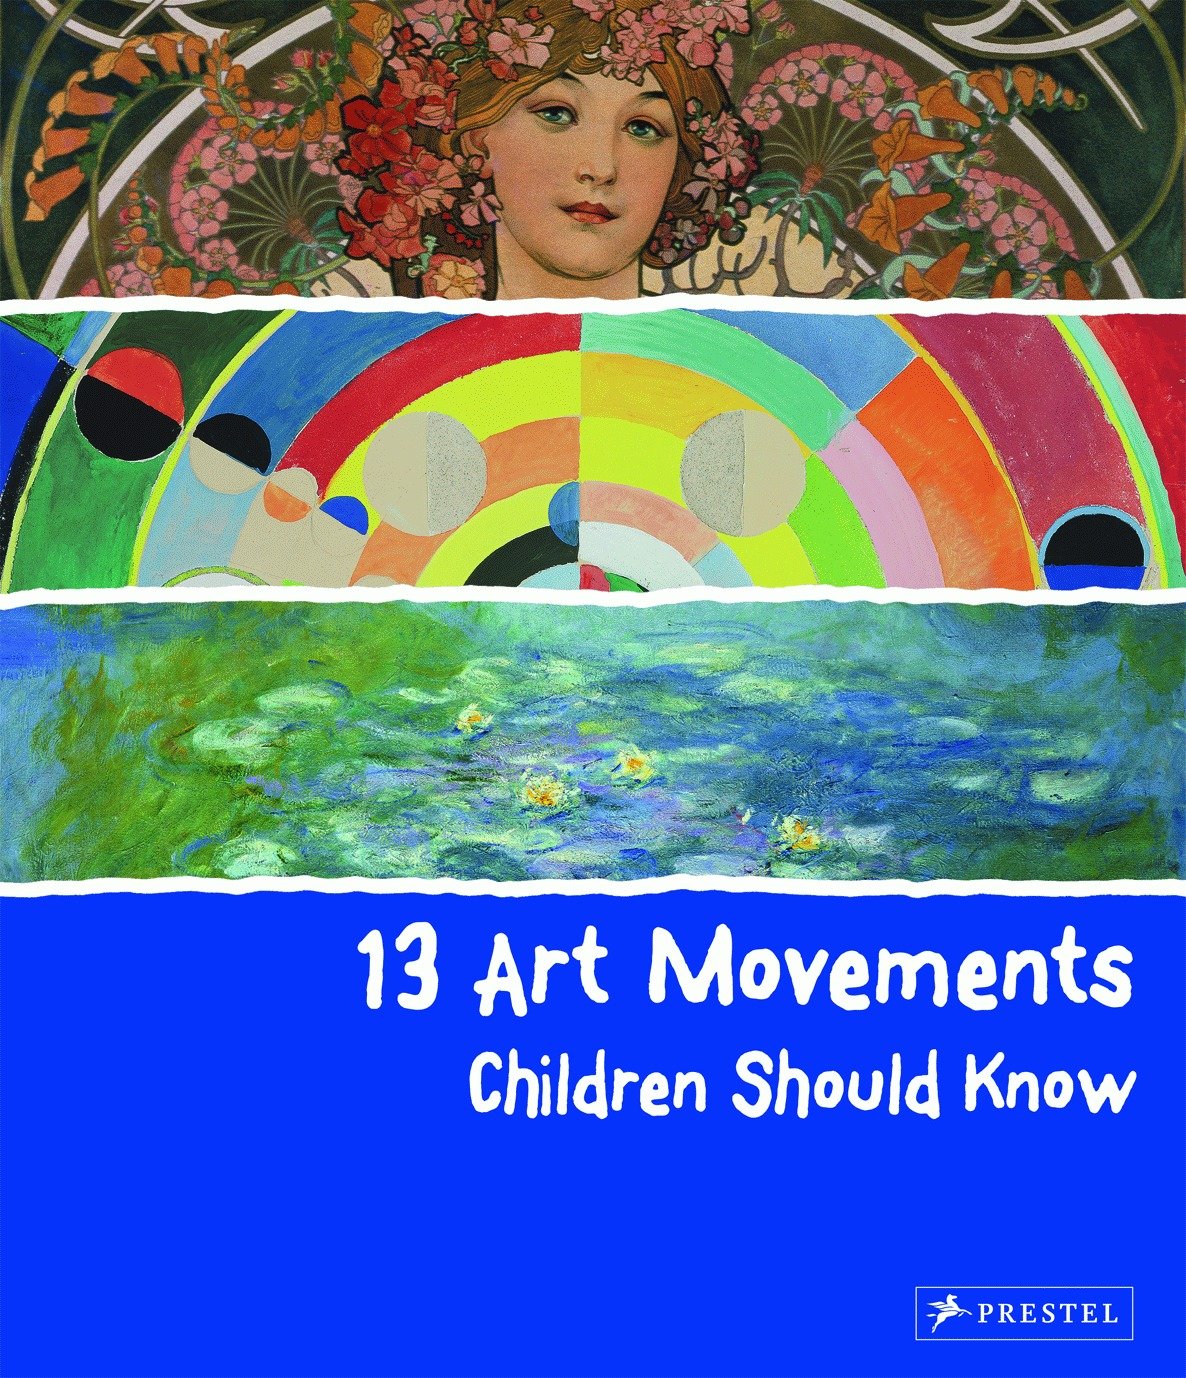 13 Art Movements Children Should Know (Hardcover Book)